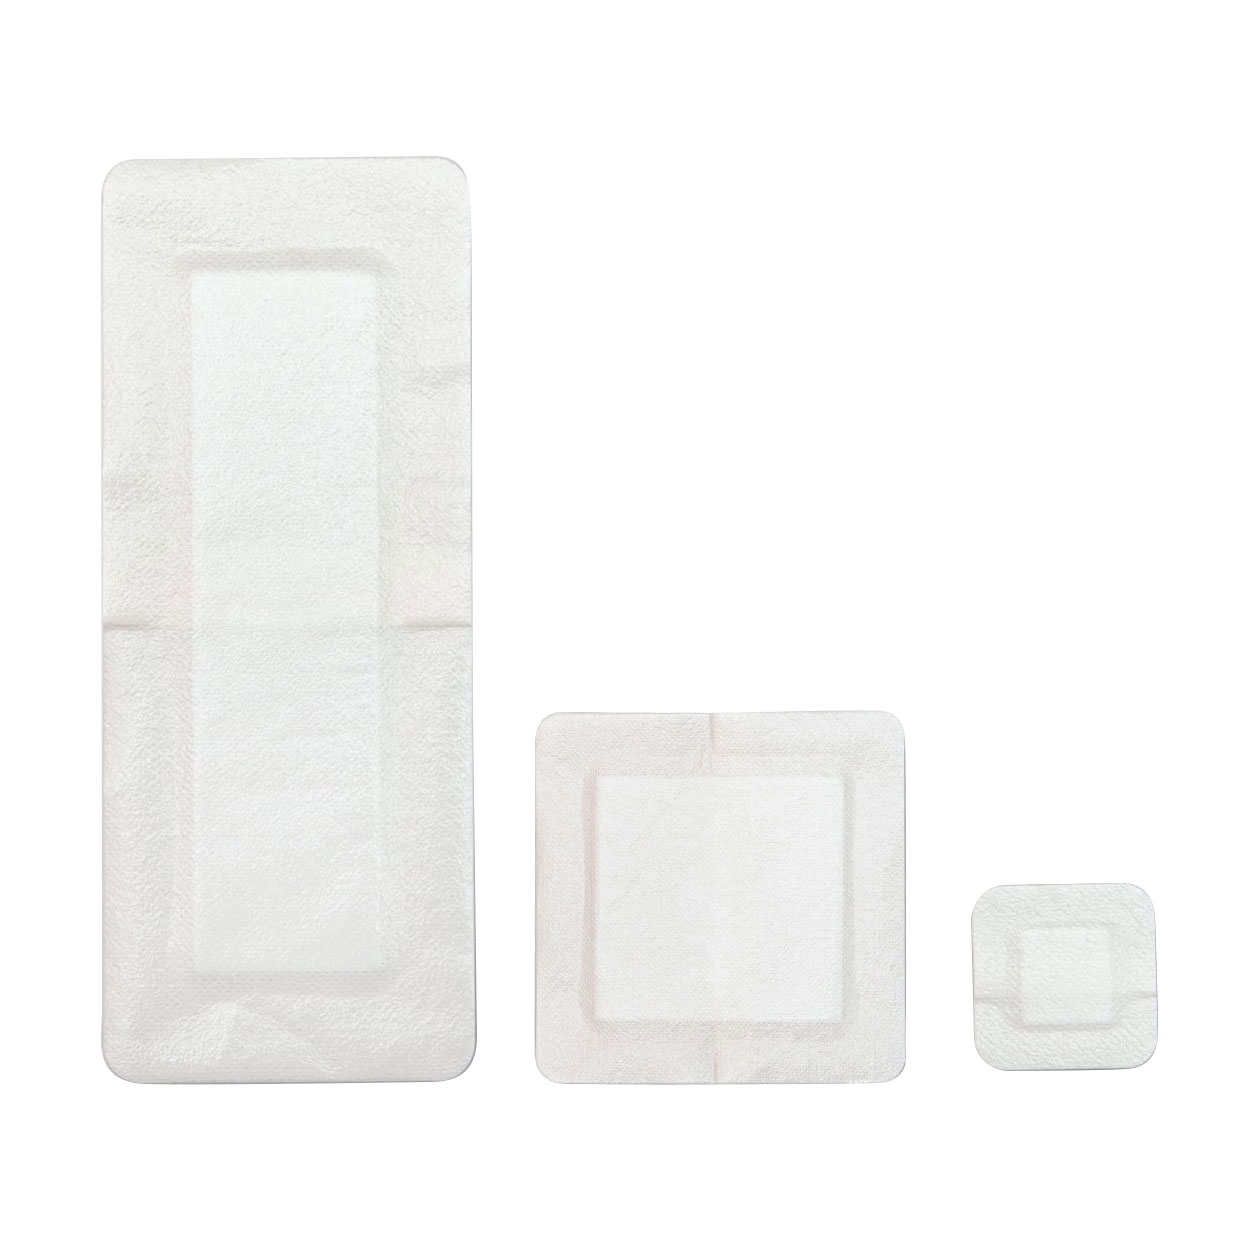 Zeni PAD PLUS Wound Care composite dressing with adhesive border